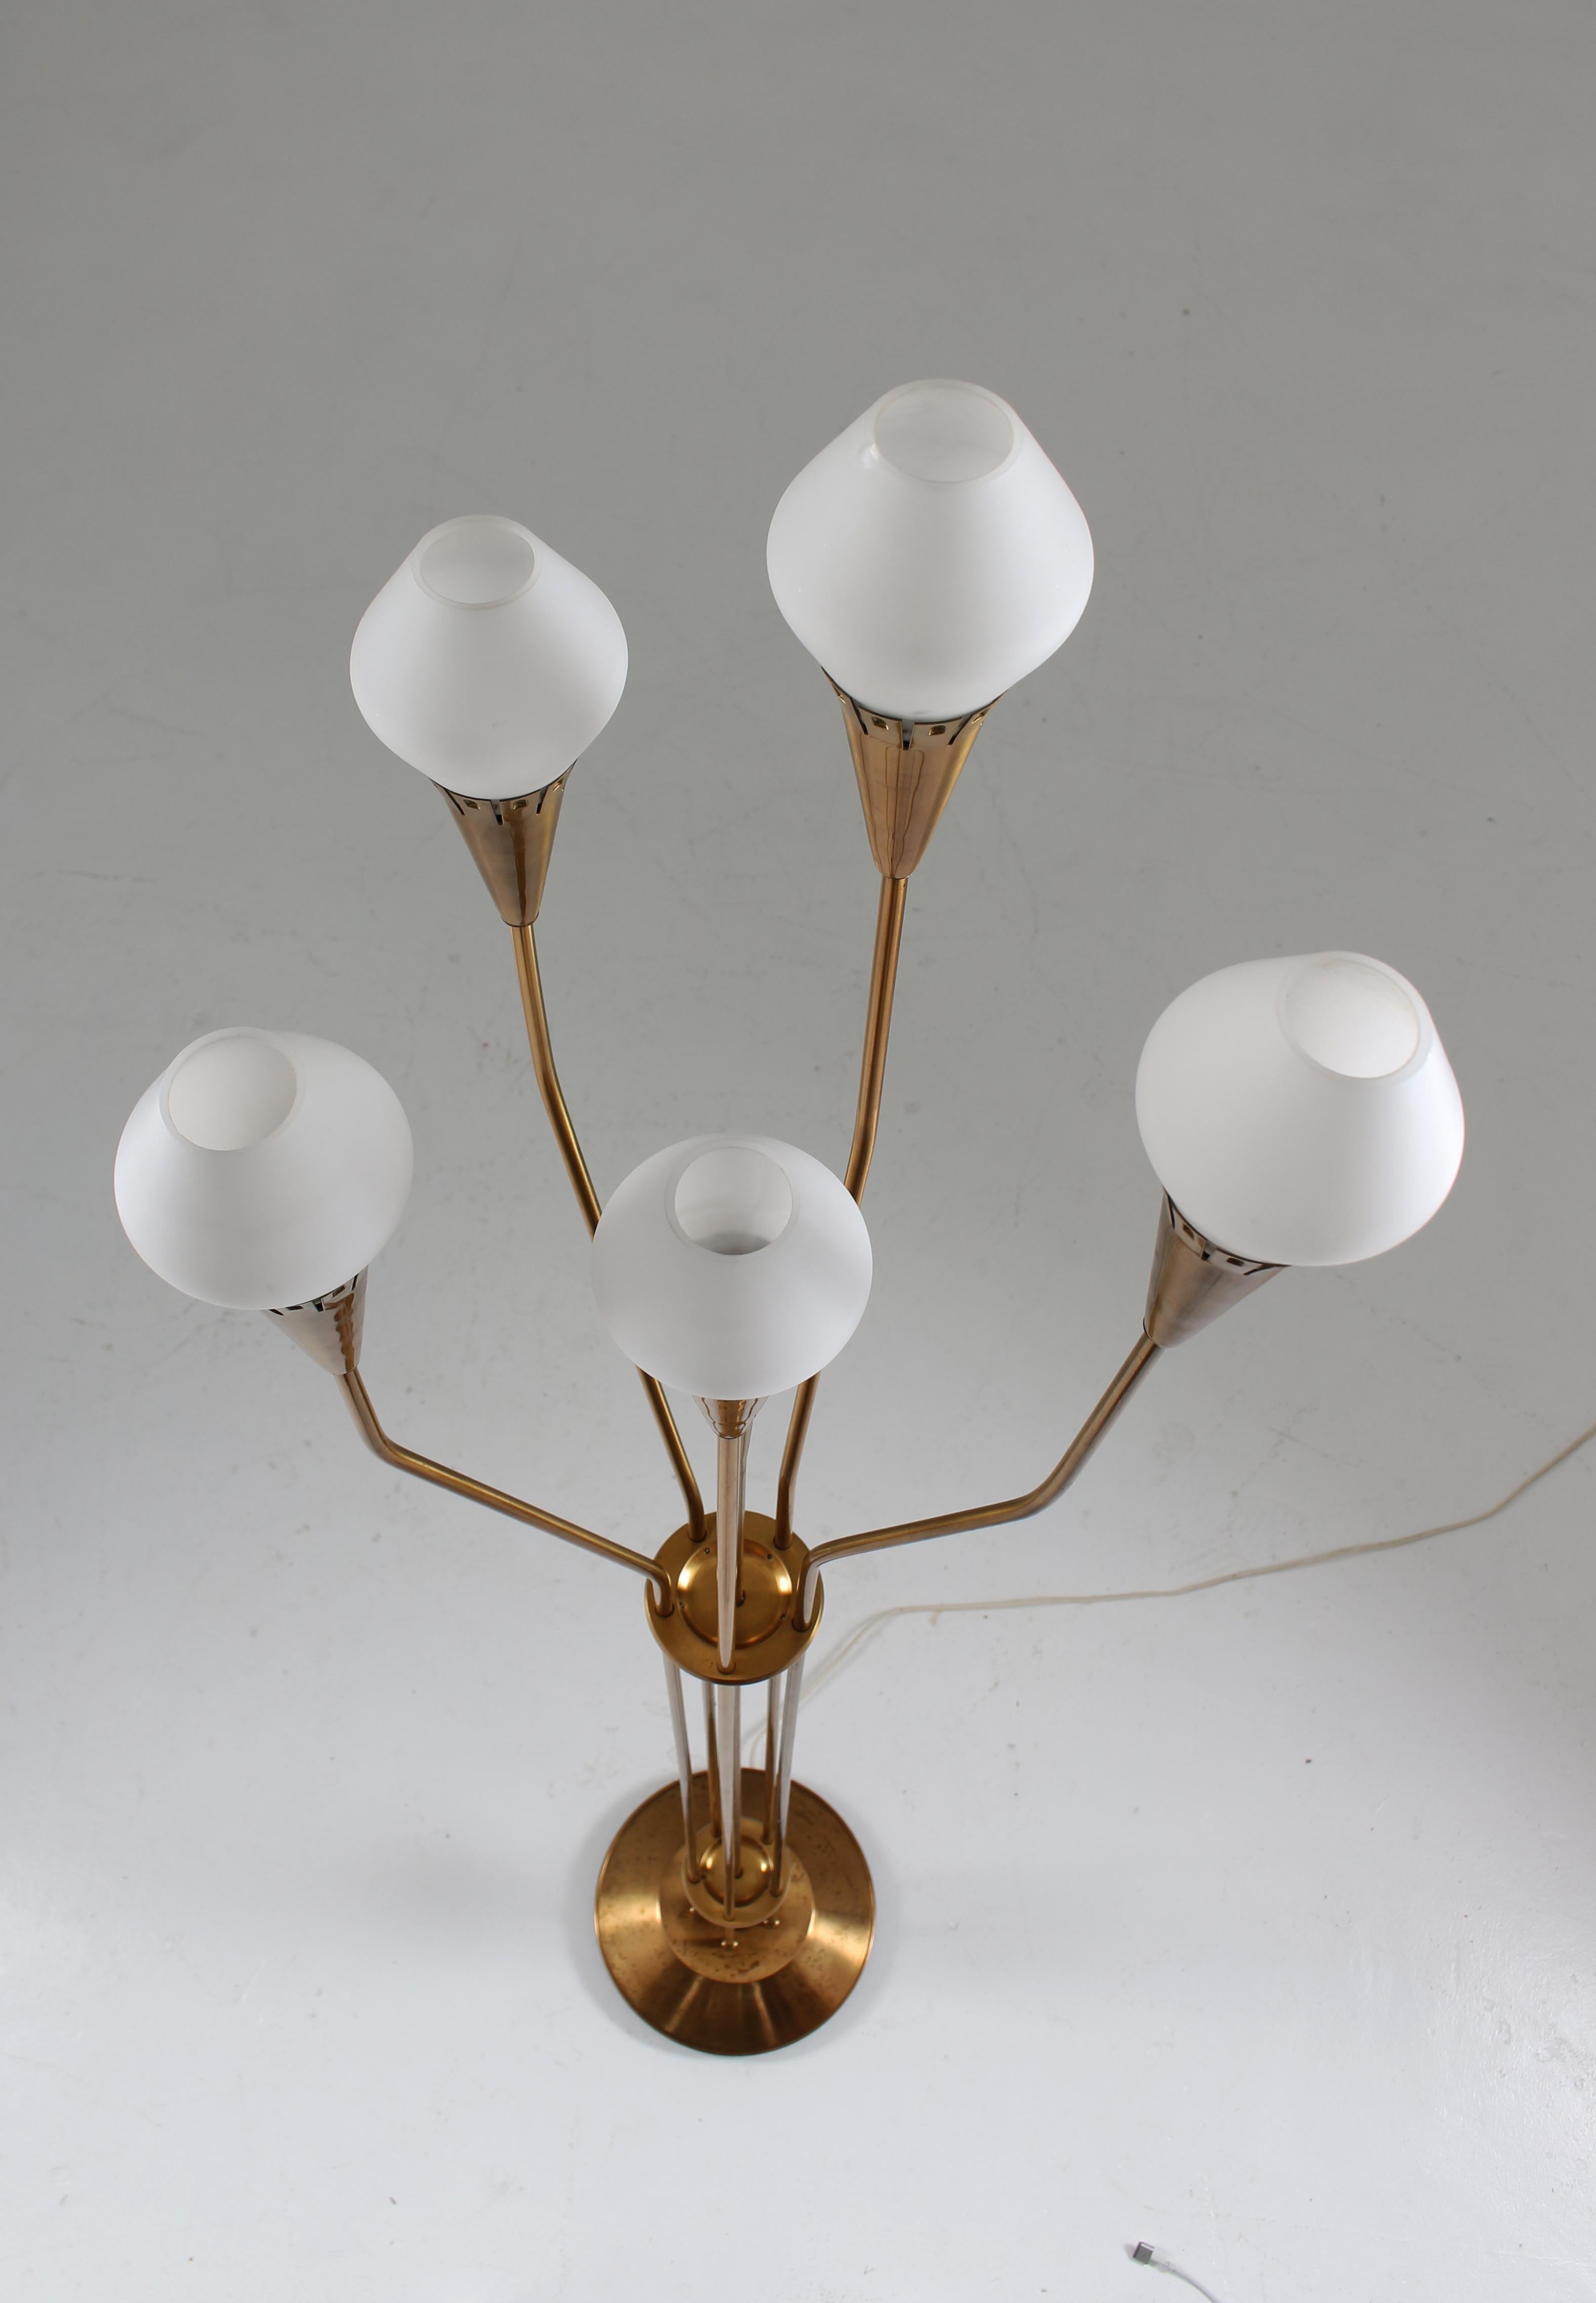 20th Century Swedish Floor Lamp in Brass and Opaline Glass by Böhlmarks, 1950s For Sale